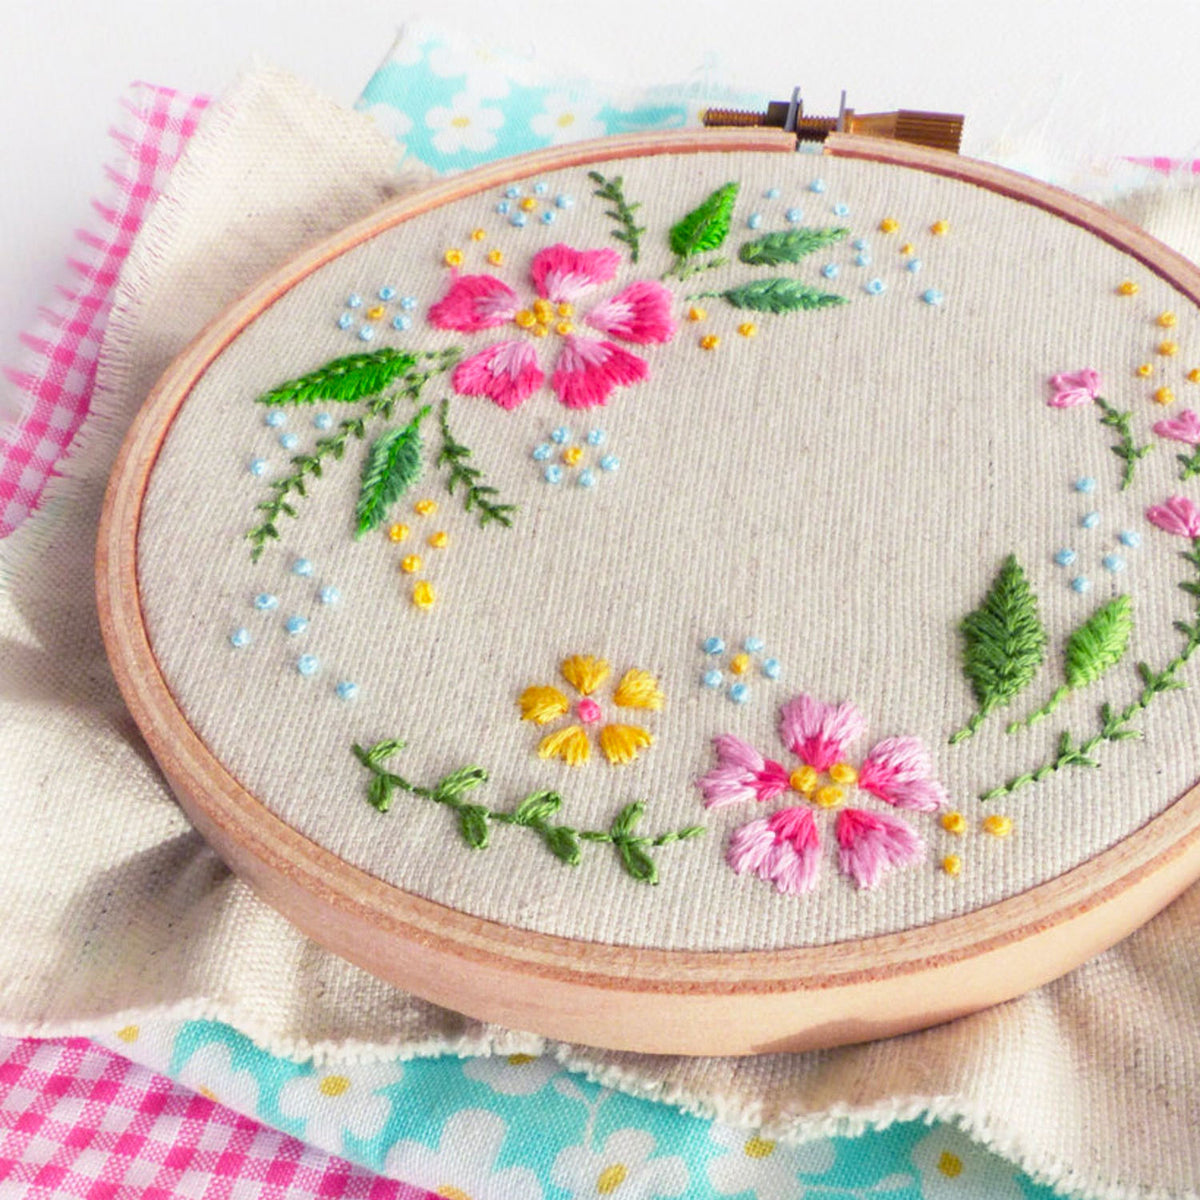 CIRCLE Embroidery FRAME. Hand Embroidery Frame. Cross Stitch